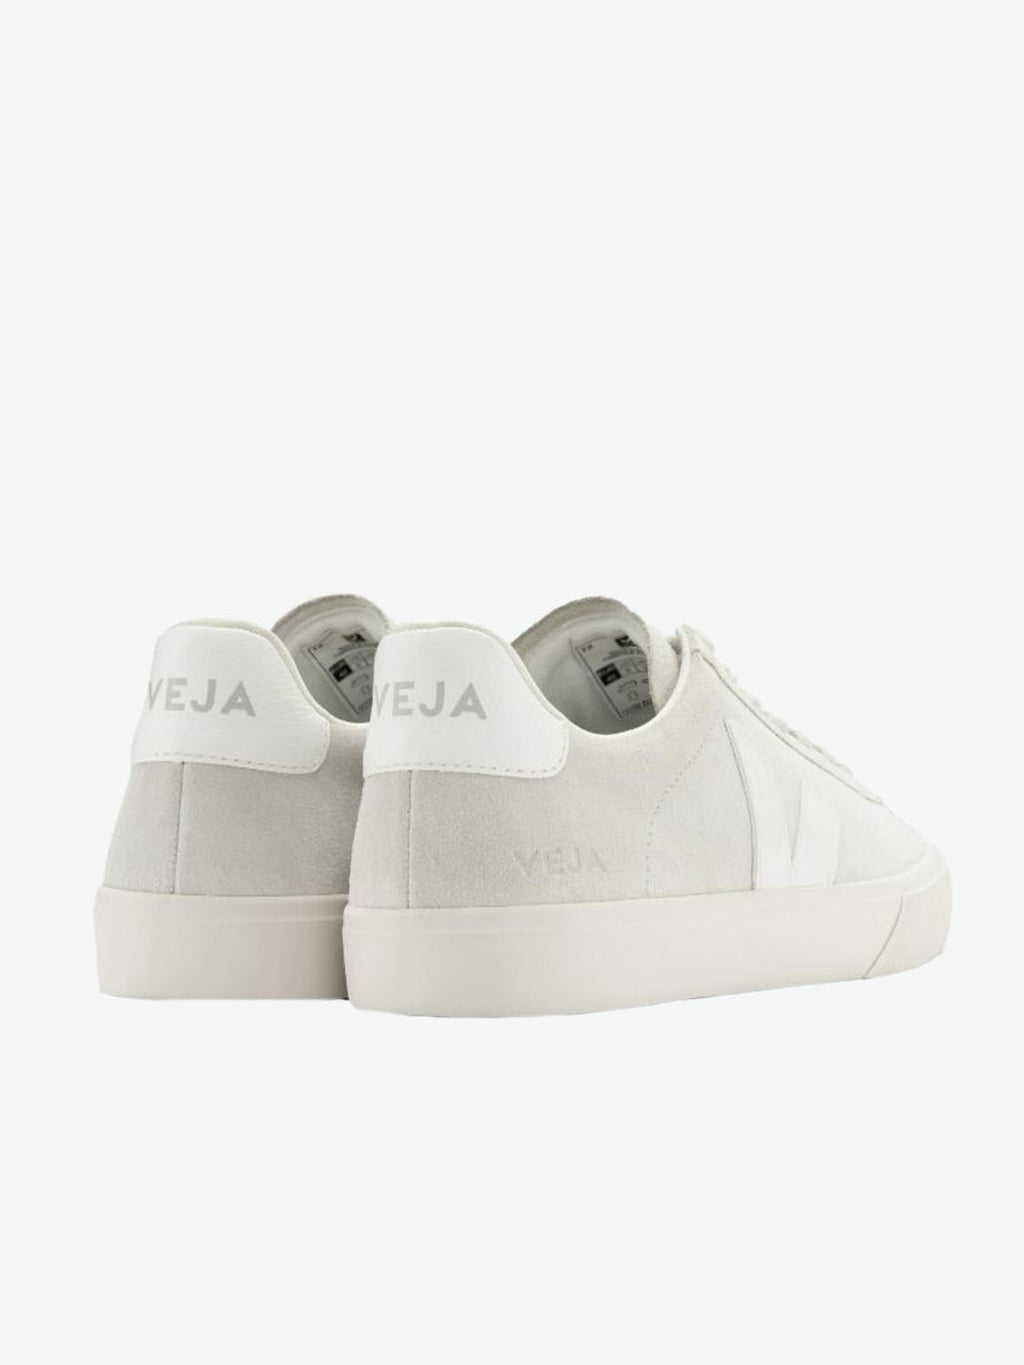 Veja Campo Suede Natural Beige Sneakers